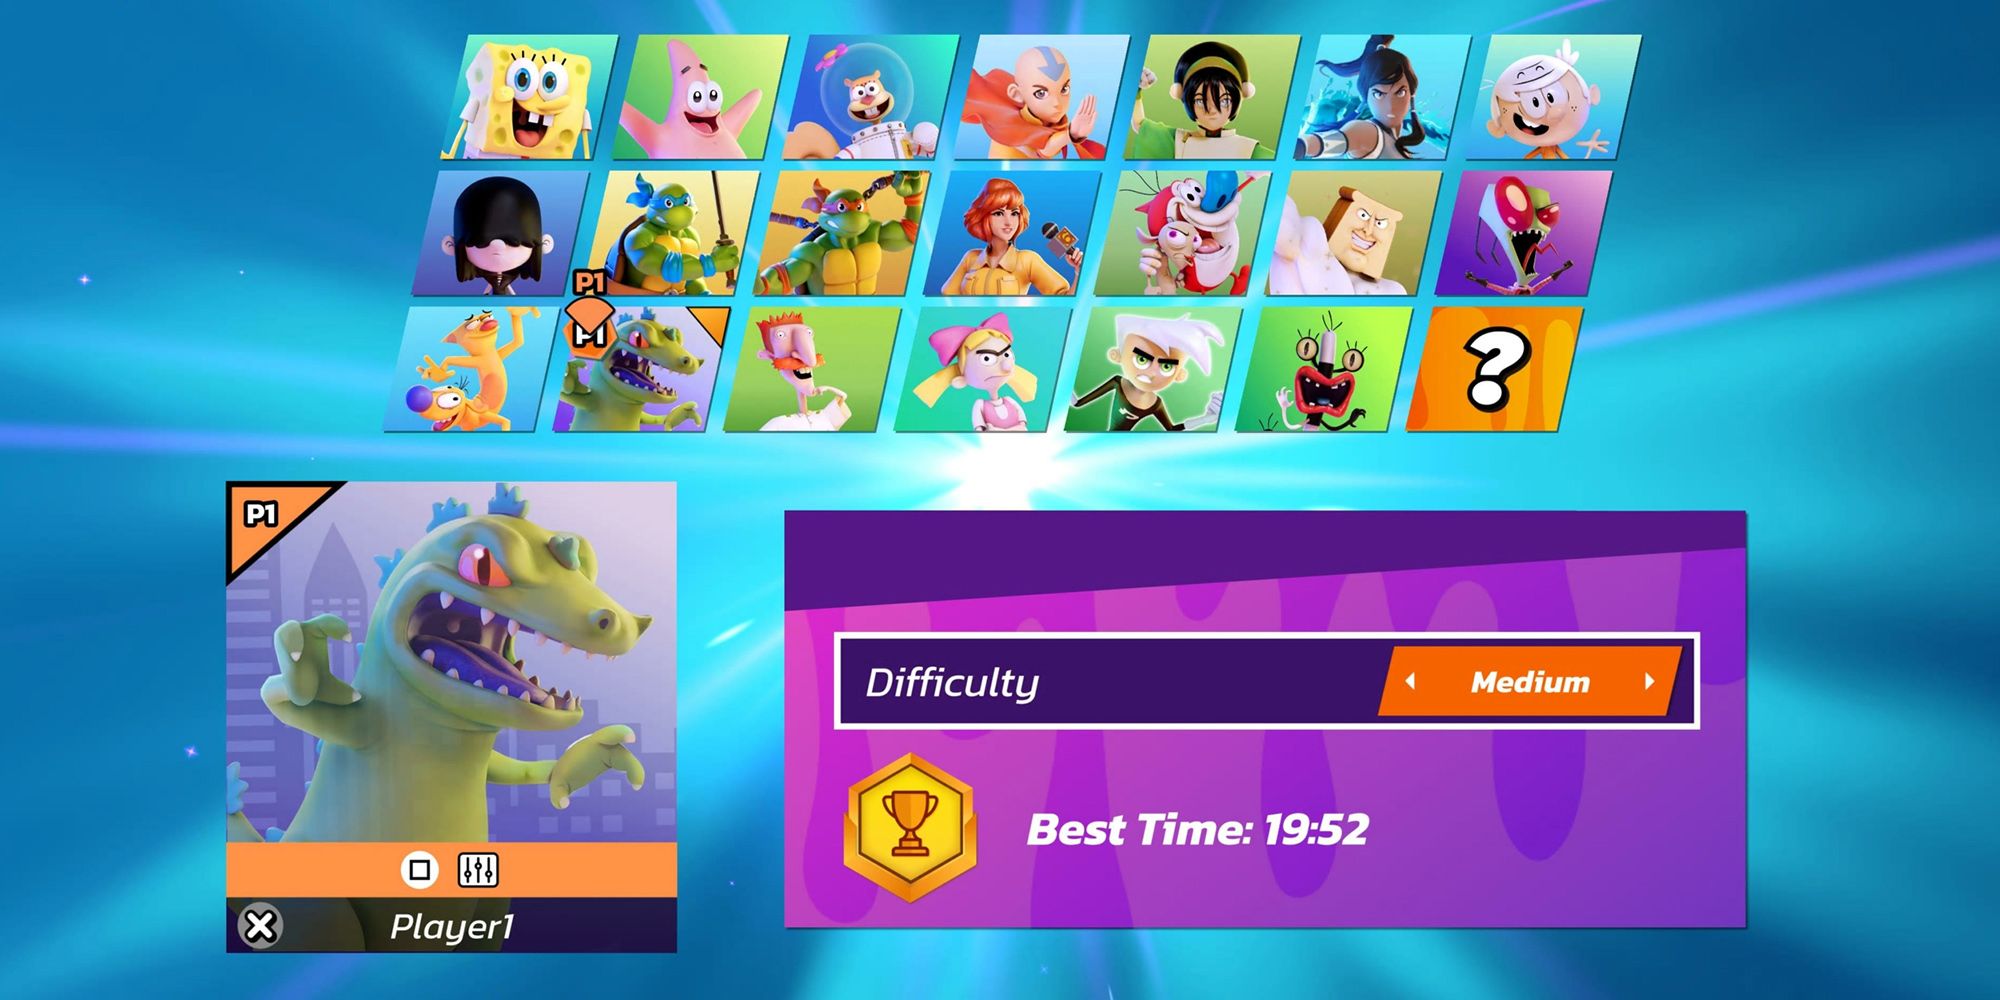 Nickelodeon All-Star Brawl - Reptar On Character Select After Beating The Arcade Mode